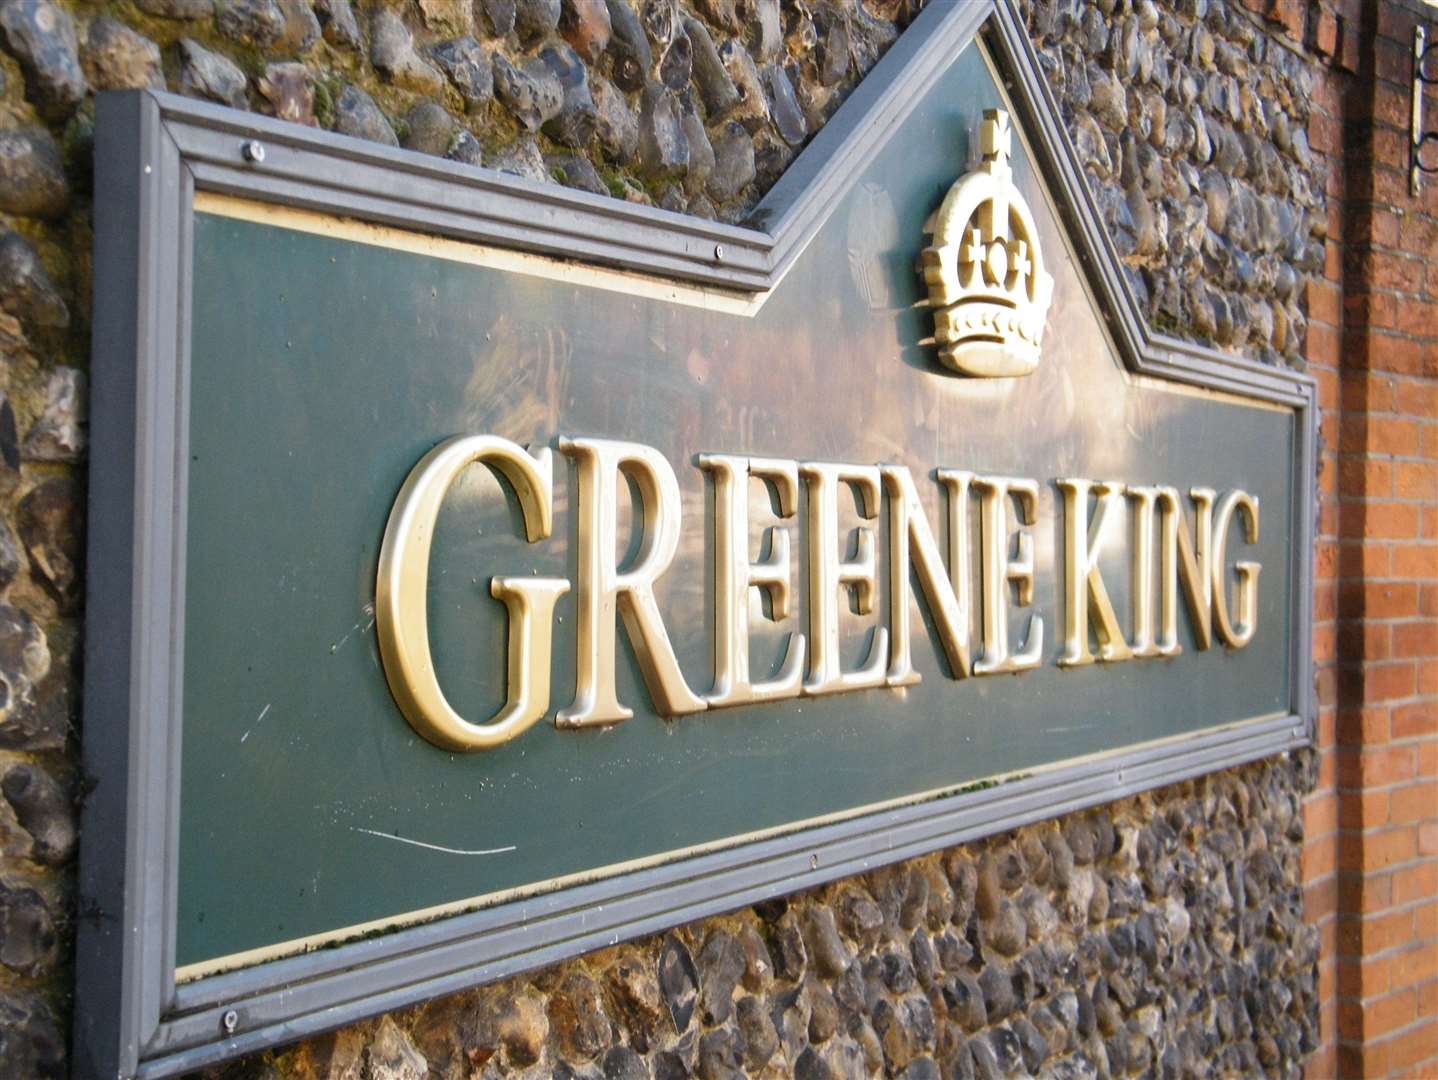 The pub is part of the Green King Brewery chain.